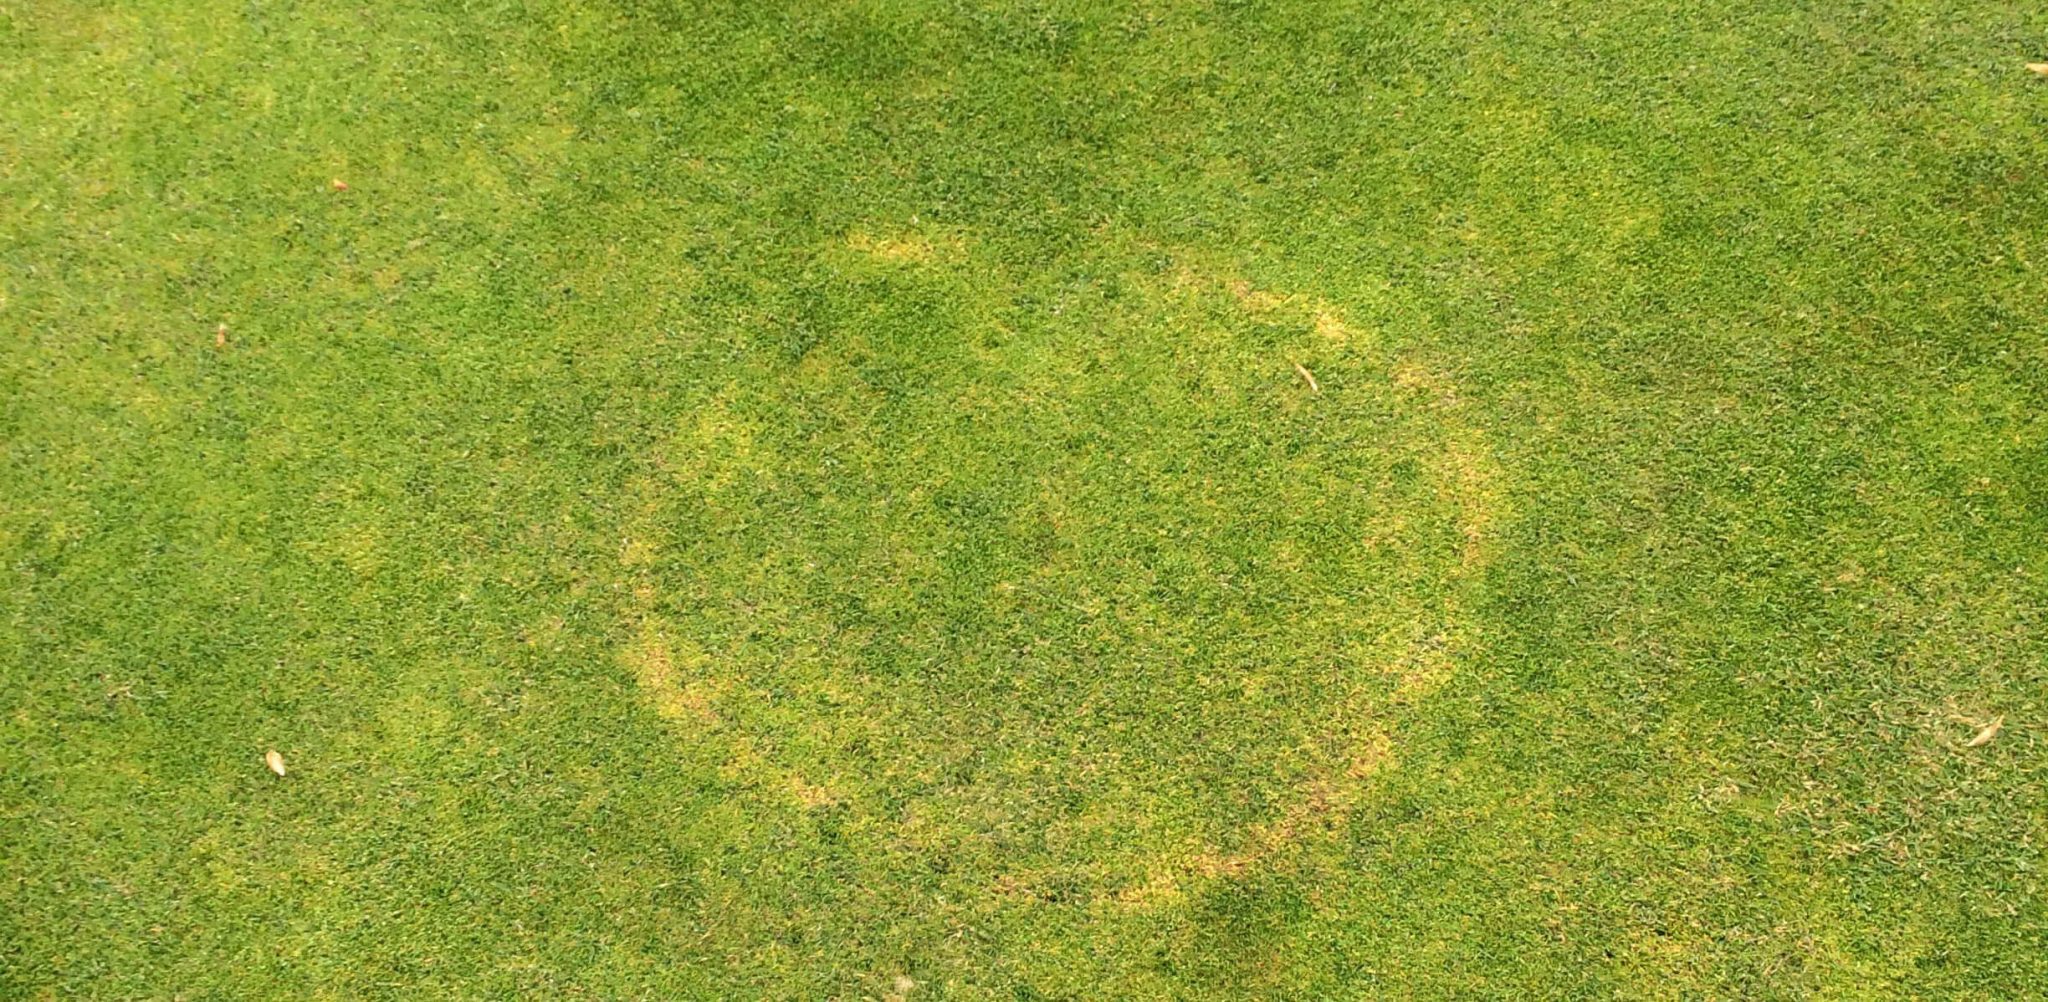 Brown Ring Patch on field